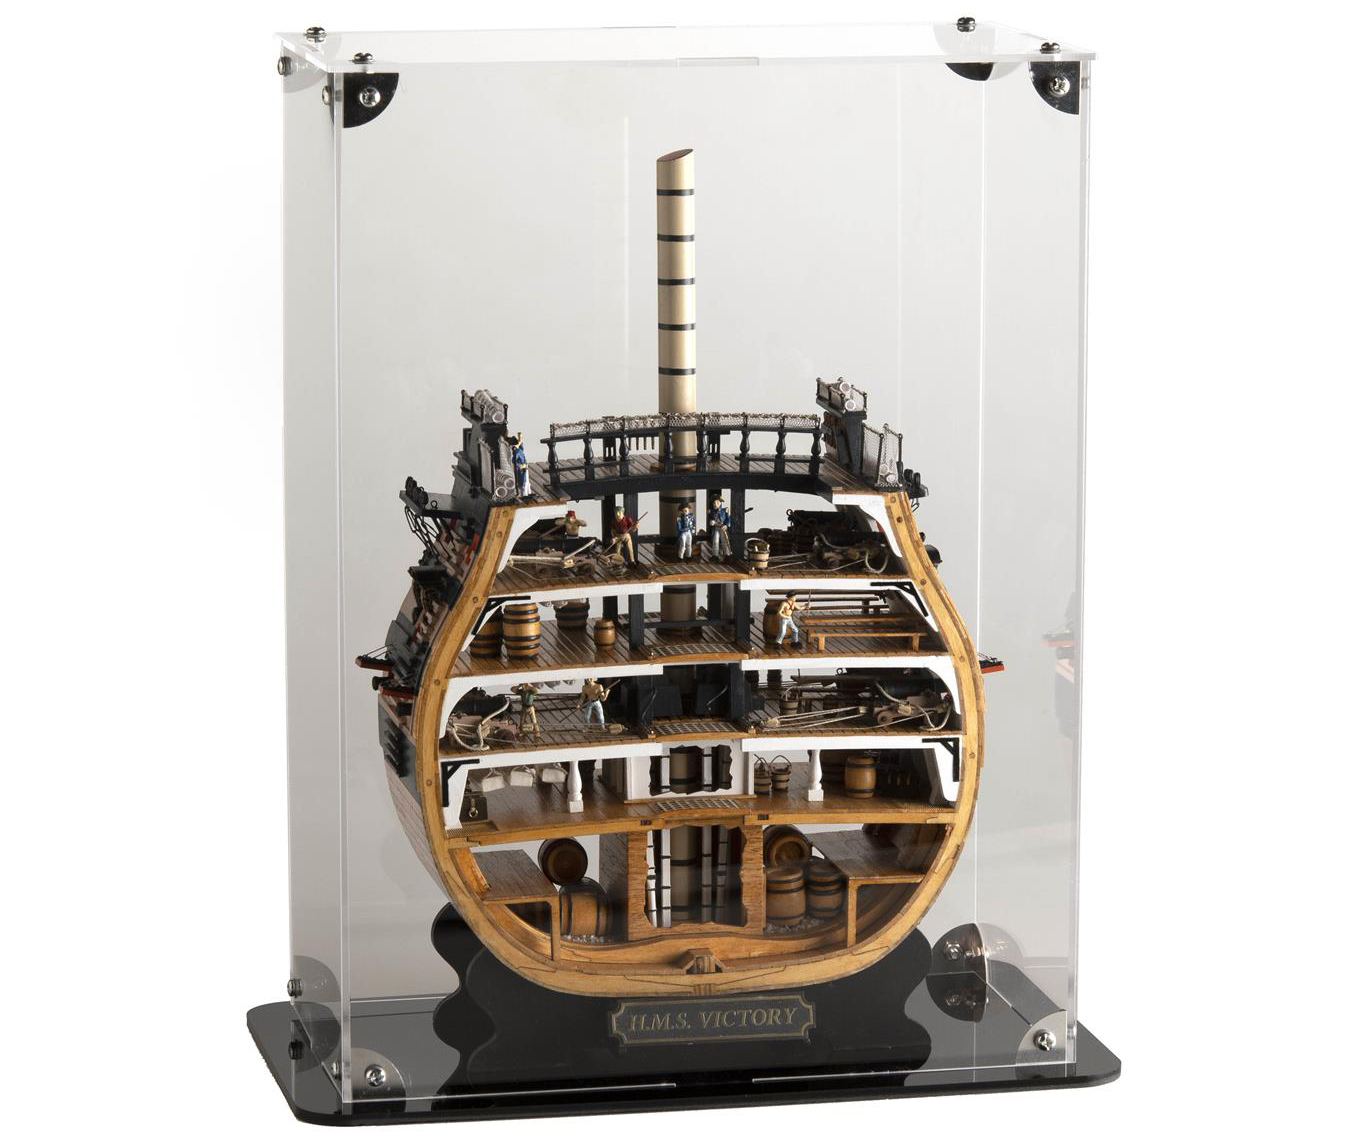 Methacrylate Urn for HMS Victory Section Model (20500AS) by Artesanía Latina.